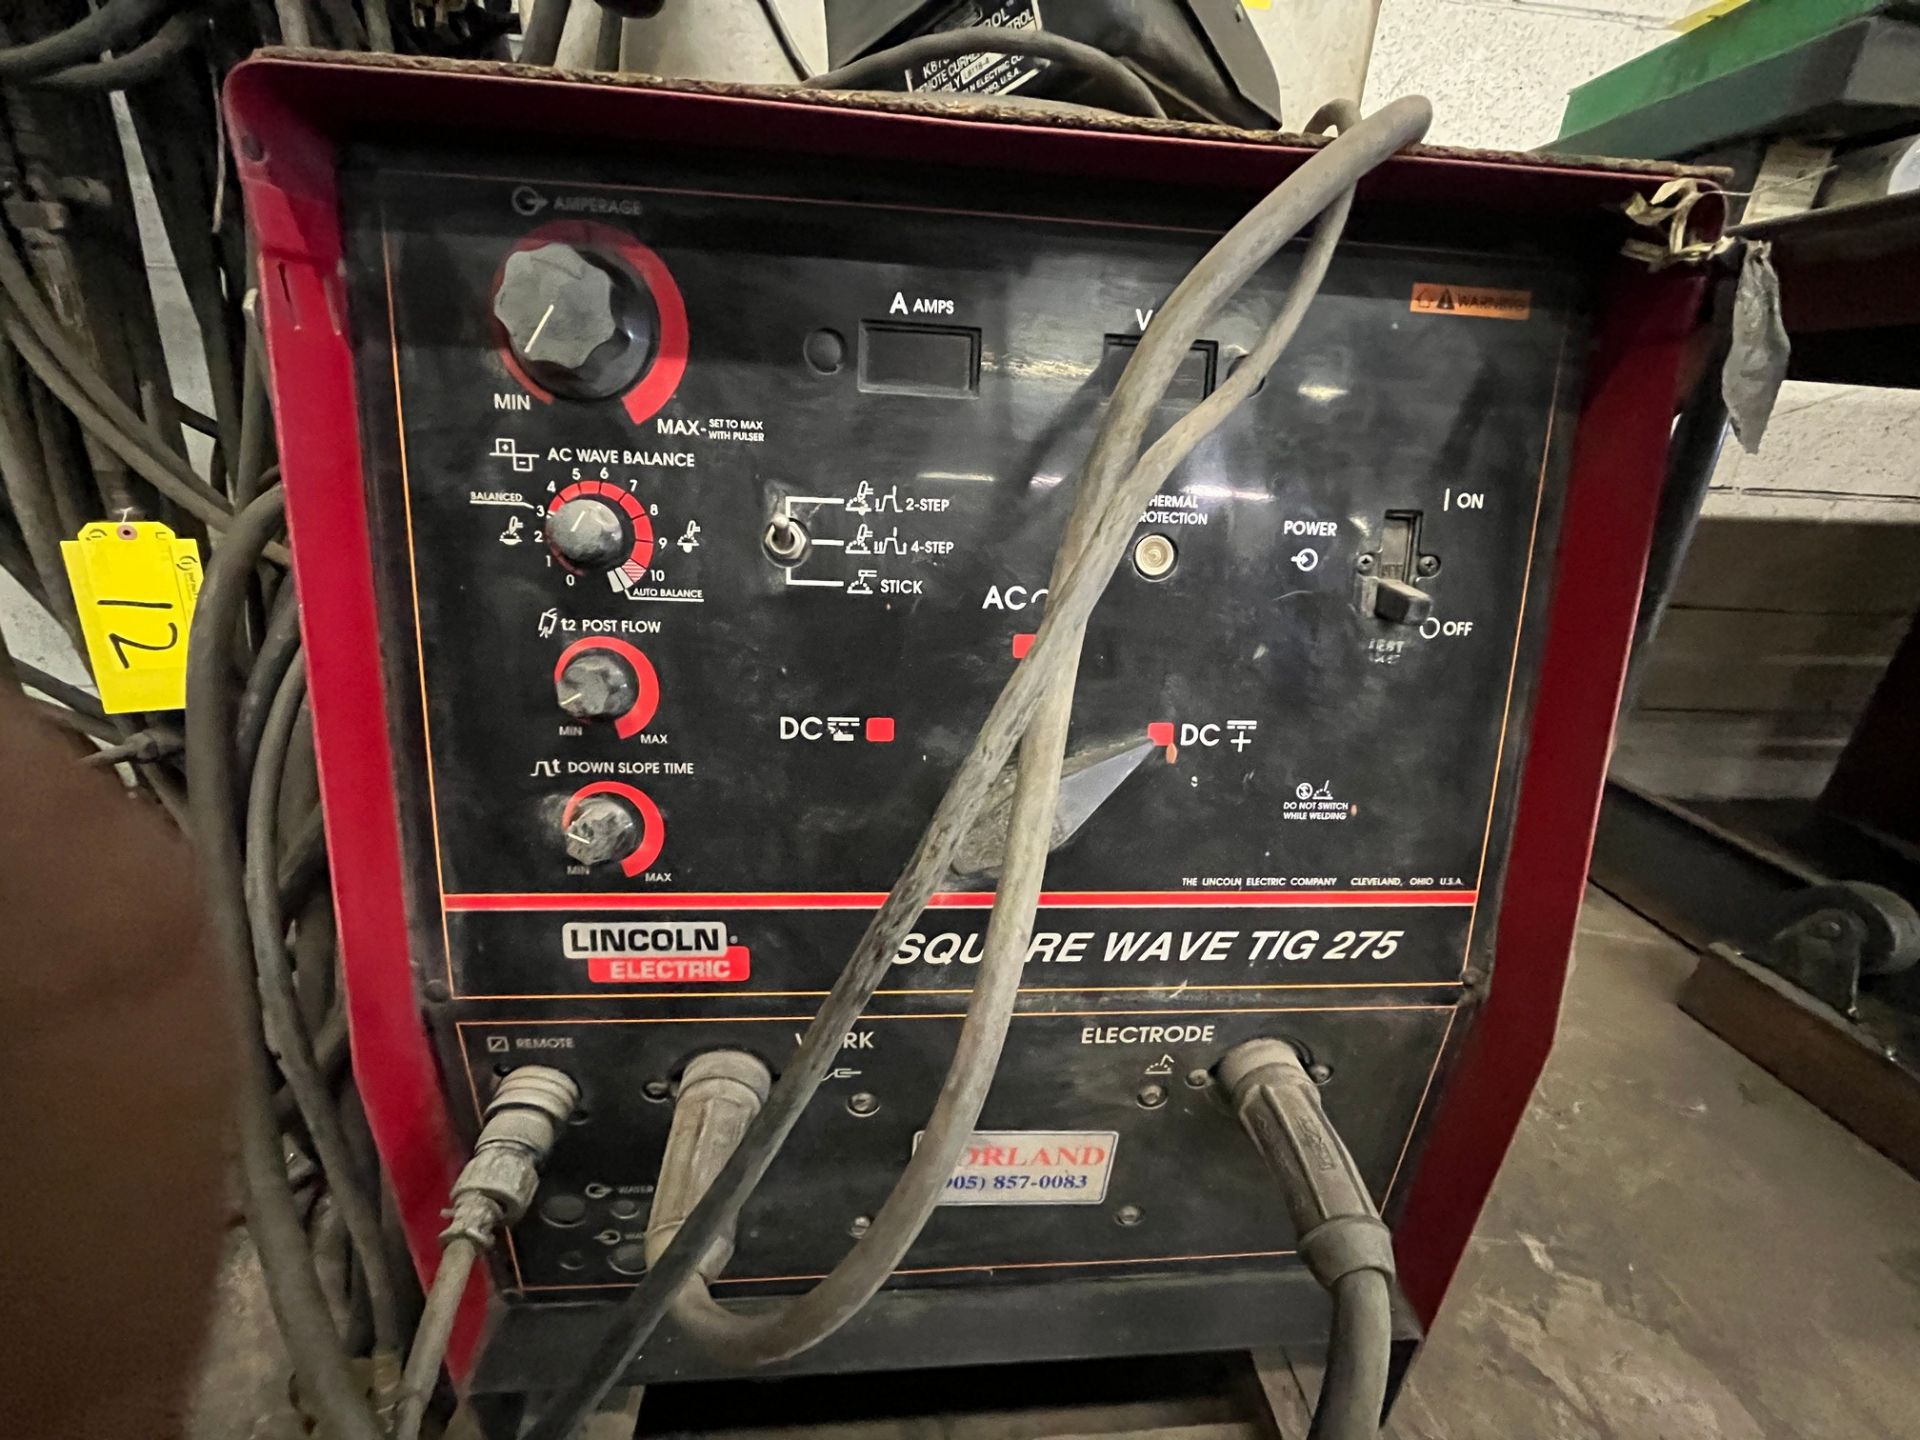 LINCOLN ELECTRIC SQUARE WAVE TIG 275 WELDER W/ AIRCO COOLING UNIT, CABLES, ETC. (NO TANKS) - Image 3 of 5